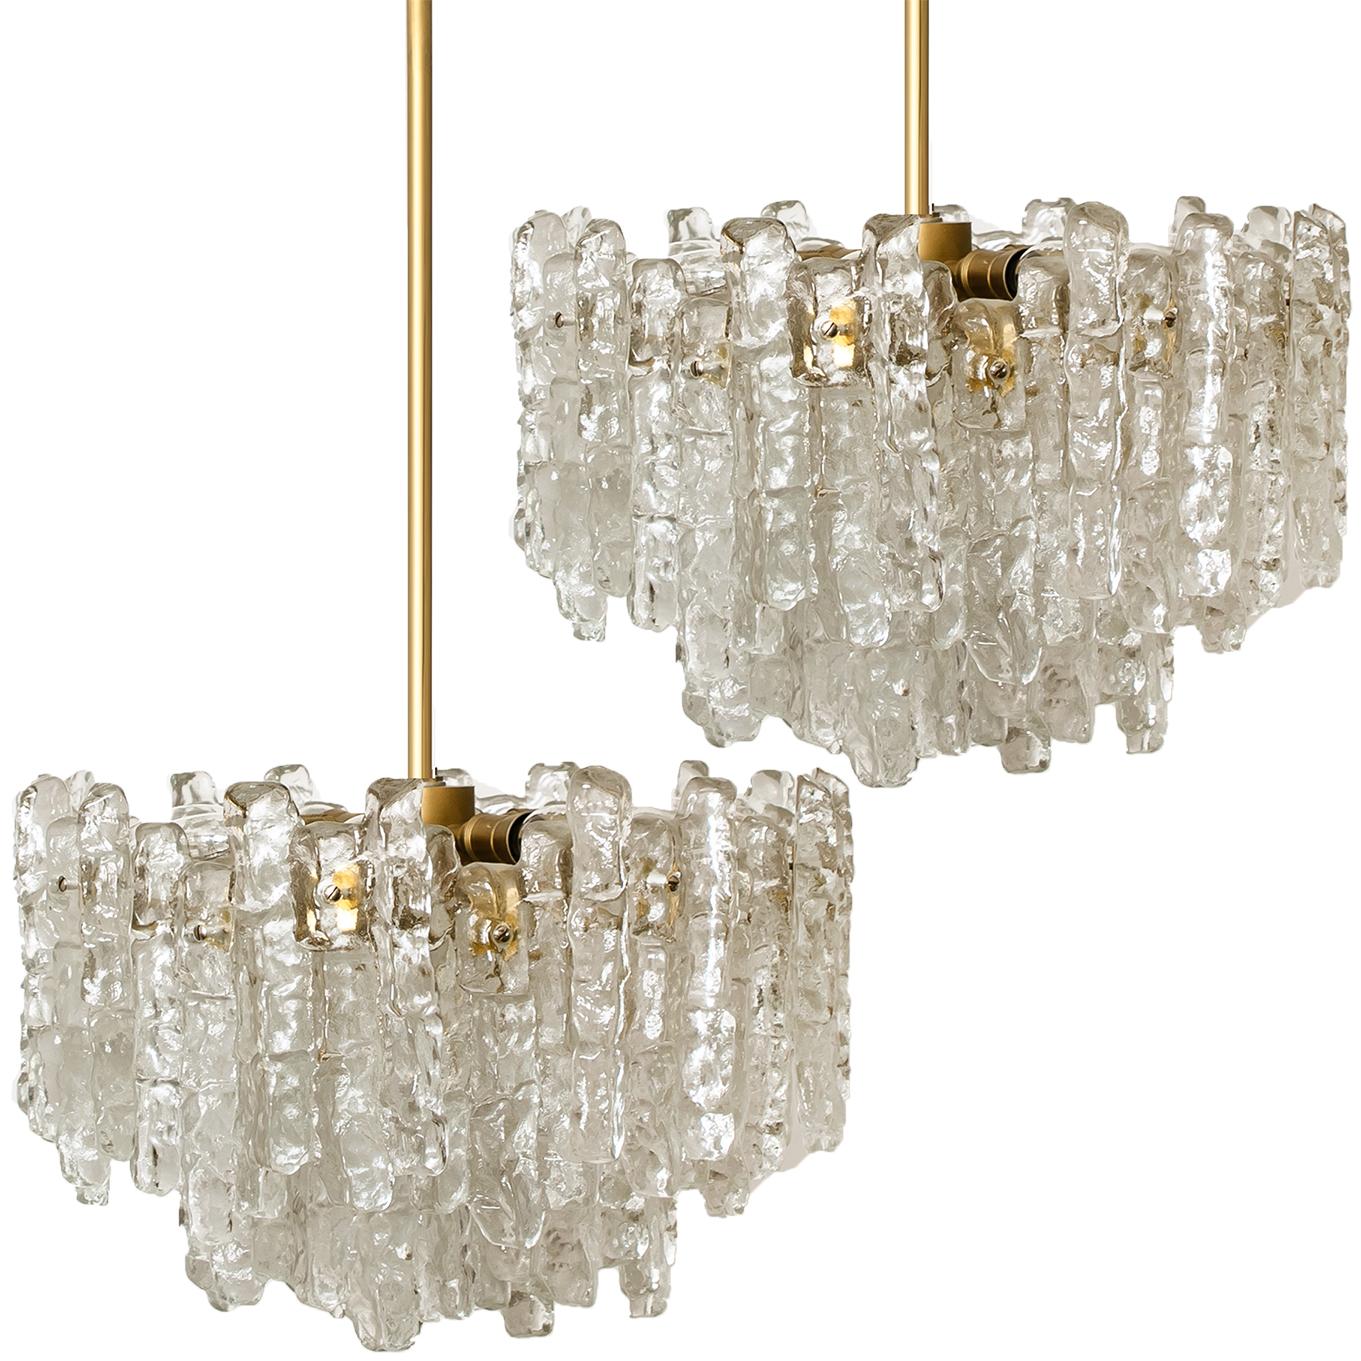 Pair of Large Modern Three-Tiered Brass Ice Glass Chandeliers by J.T. Kalmar For Sale 6